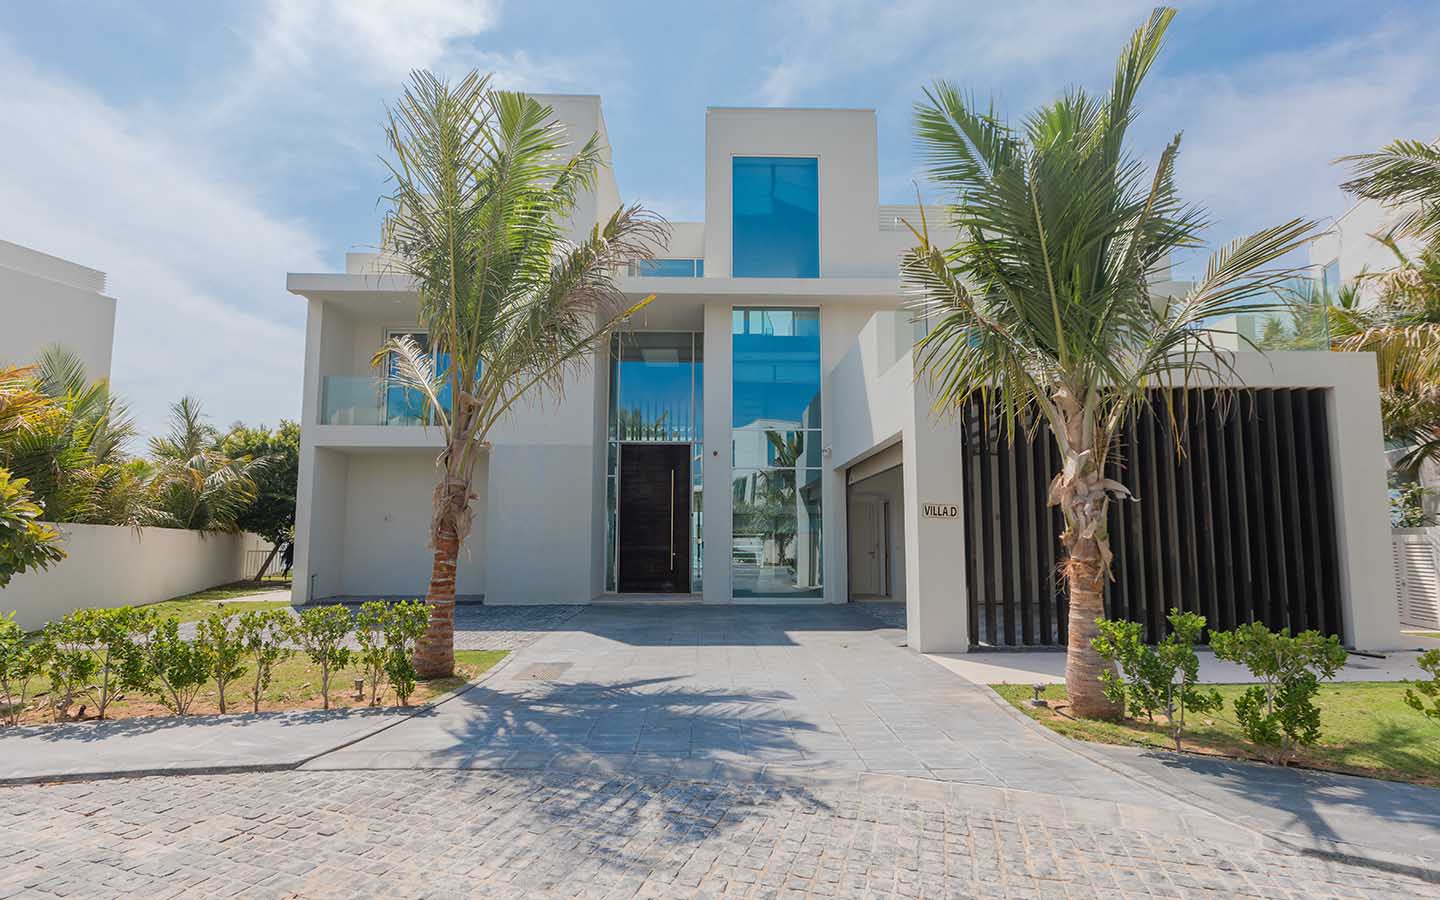 District 1 is the second most popular community for buying villas in Dubai